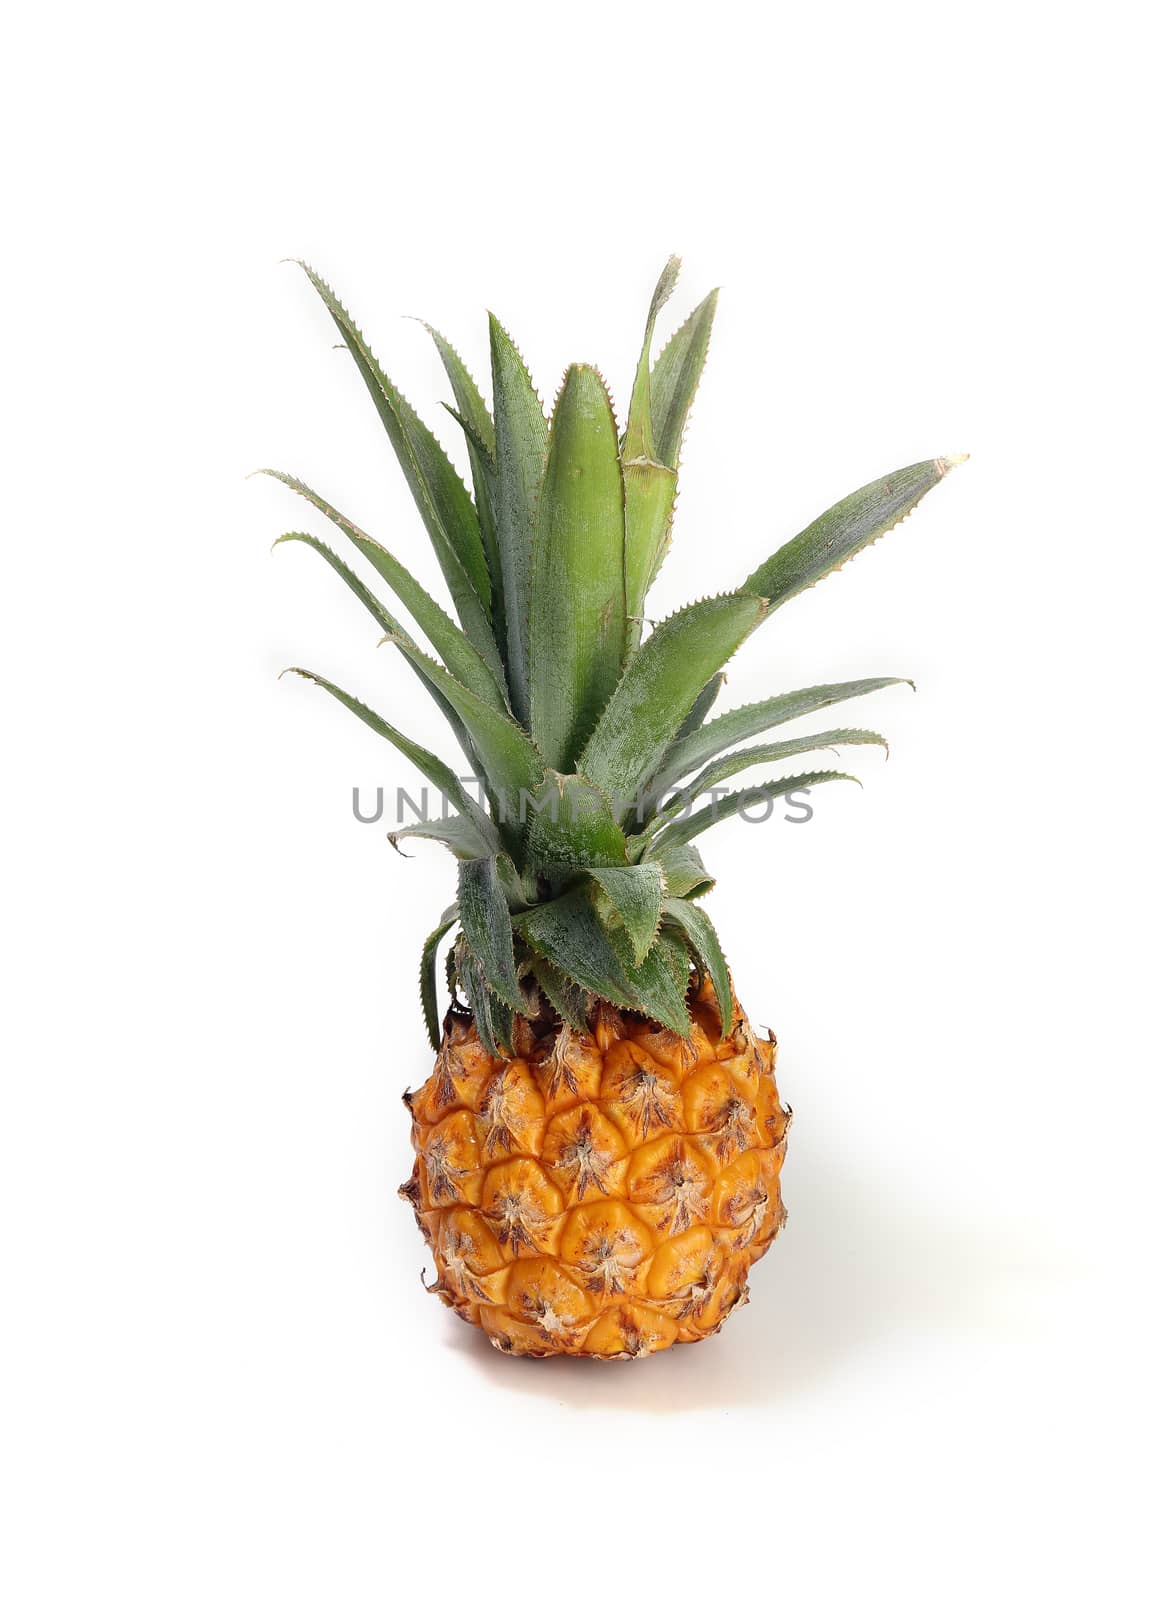 pineapple isolated